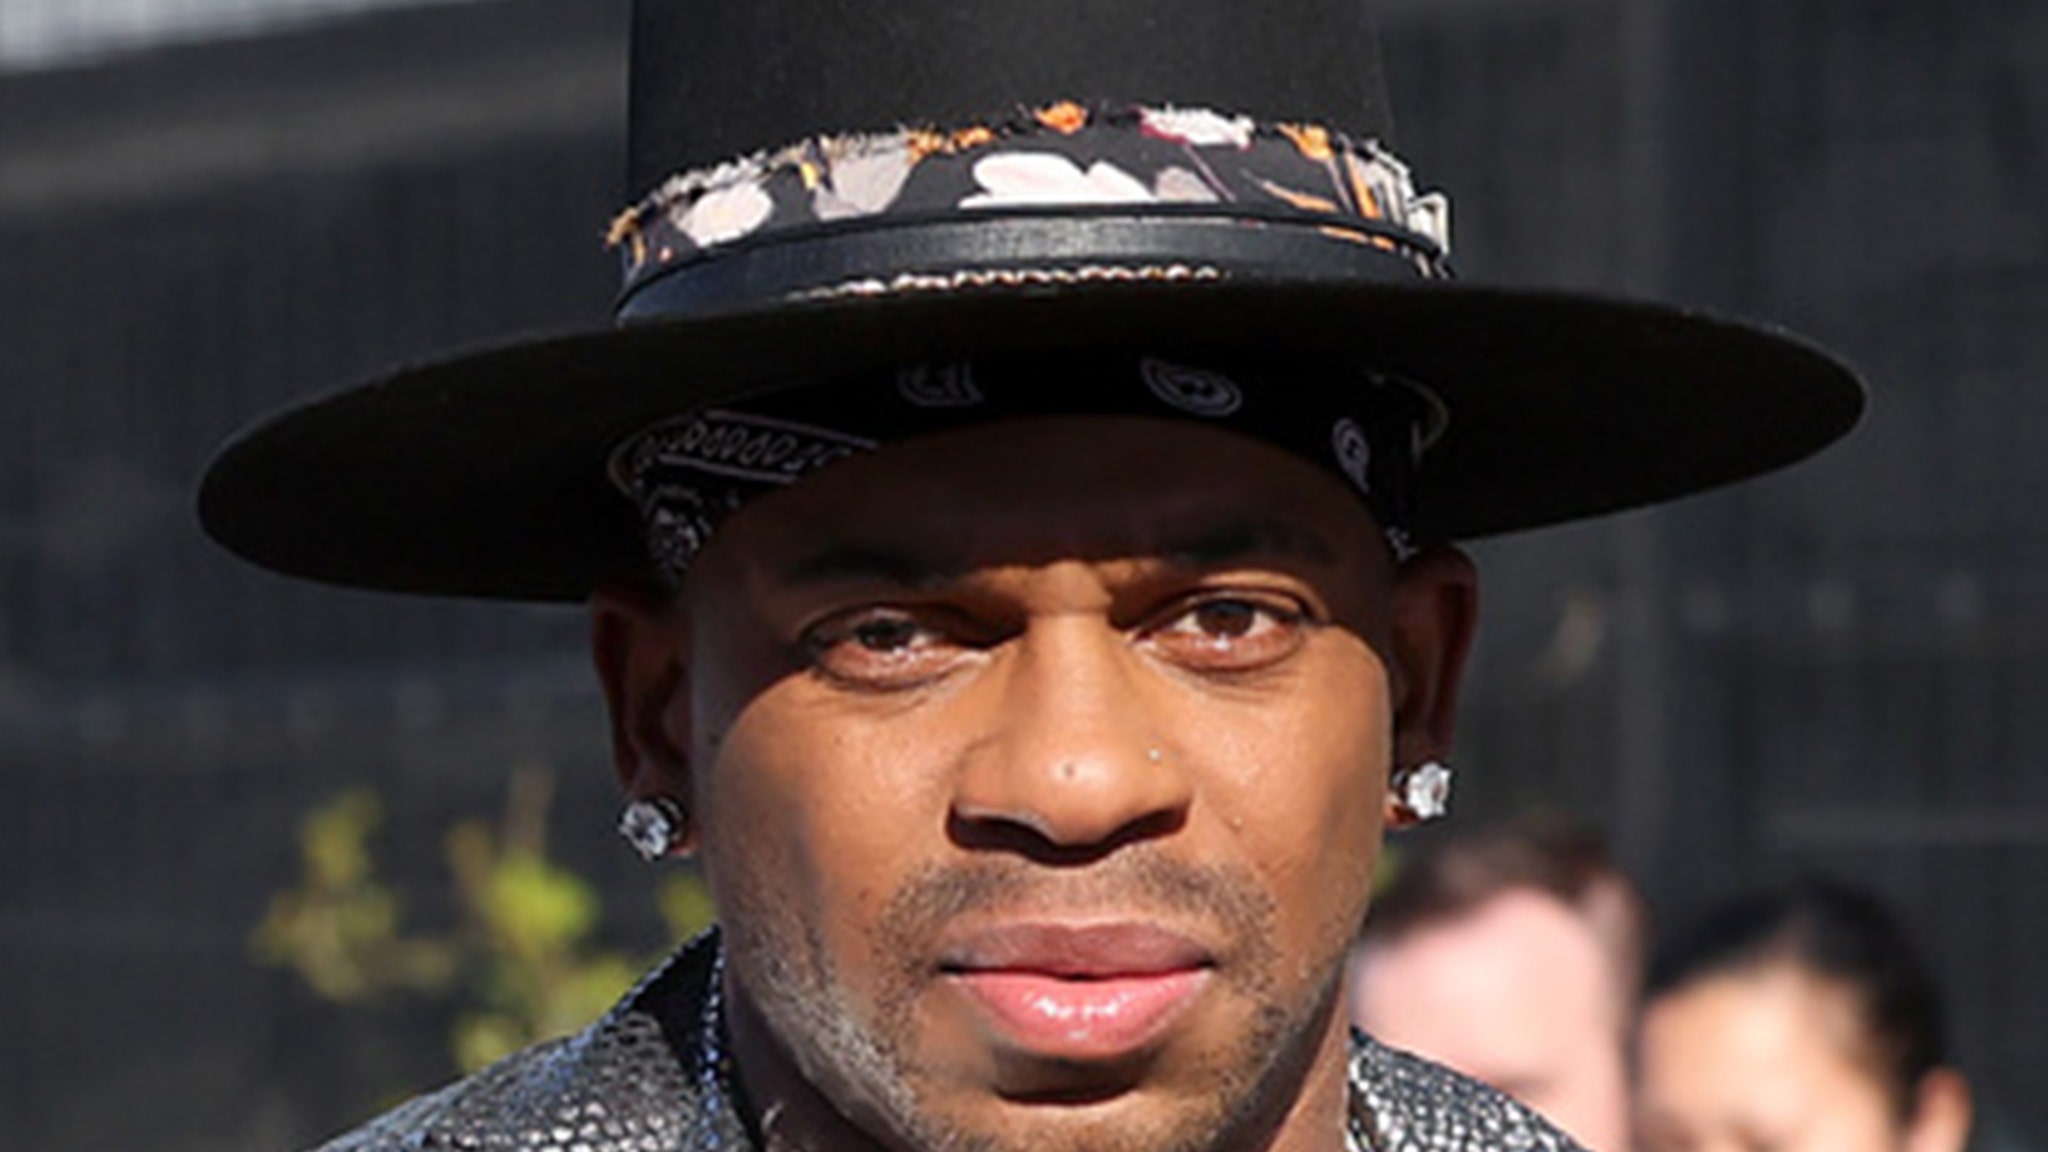 Jimmie Allen slams woman who accuses him of secretly filming sexual assault